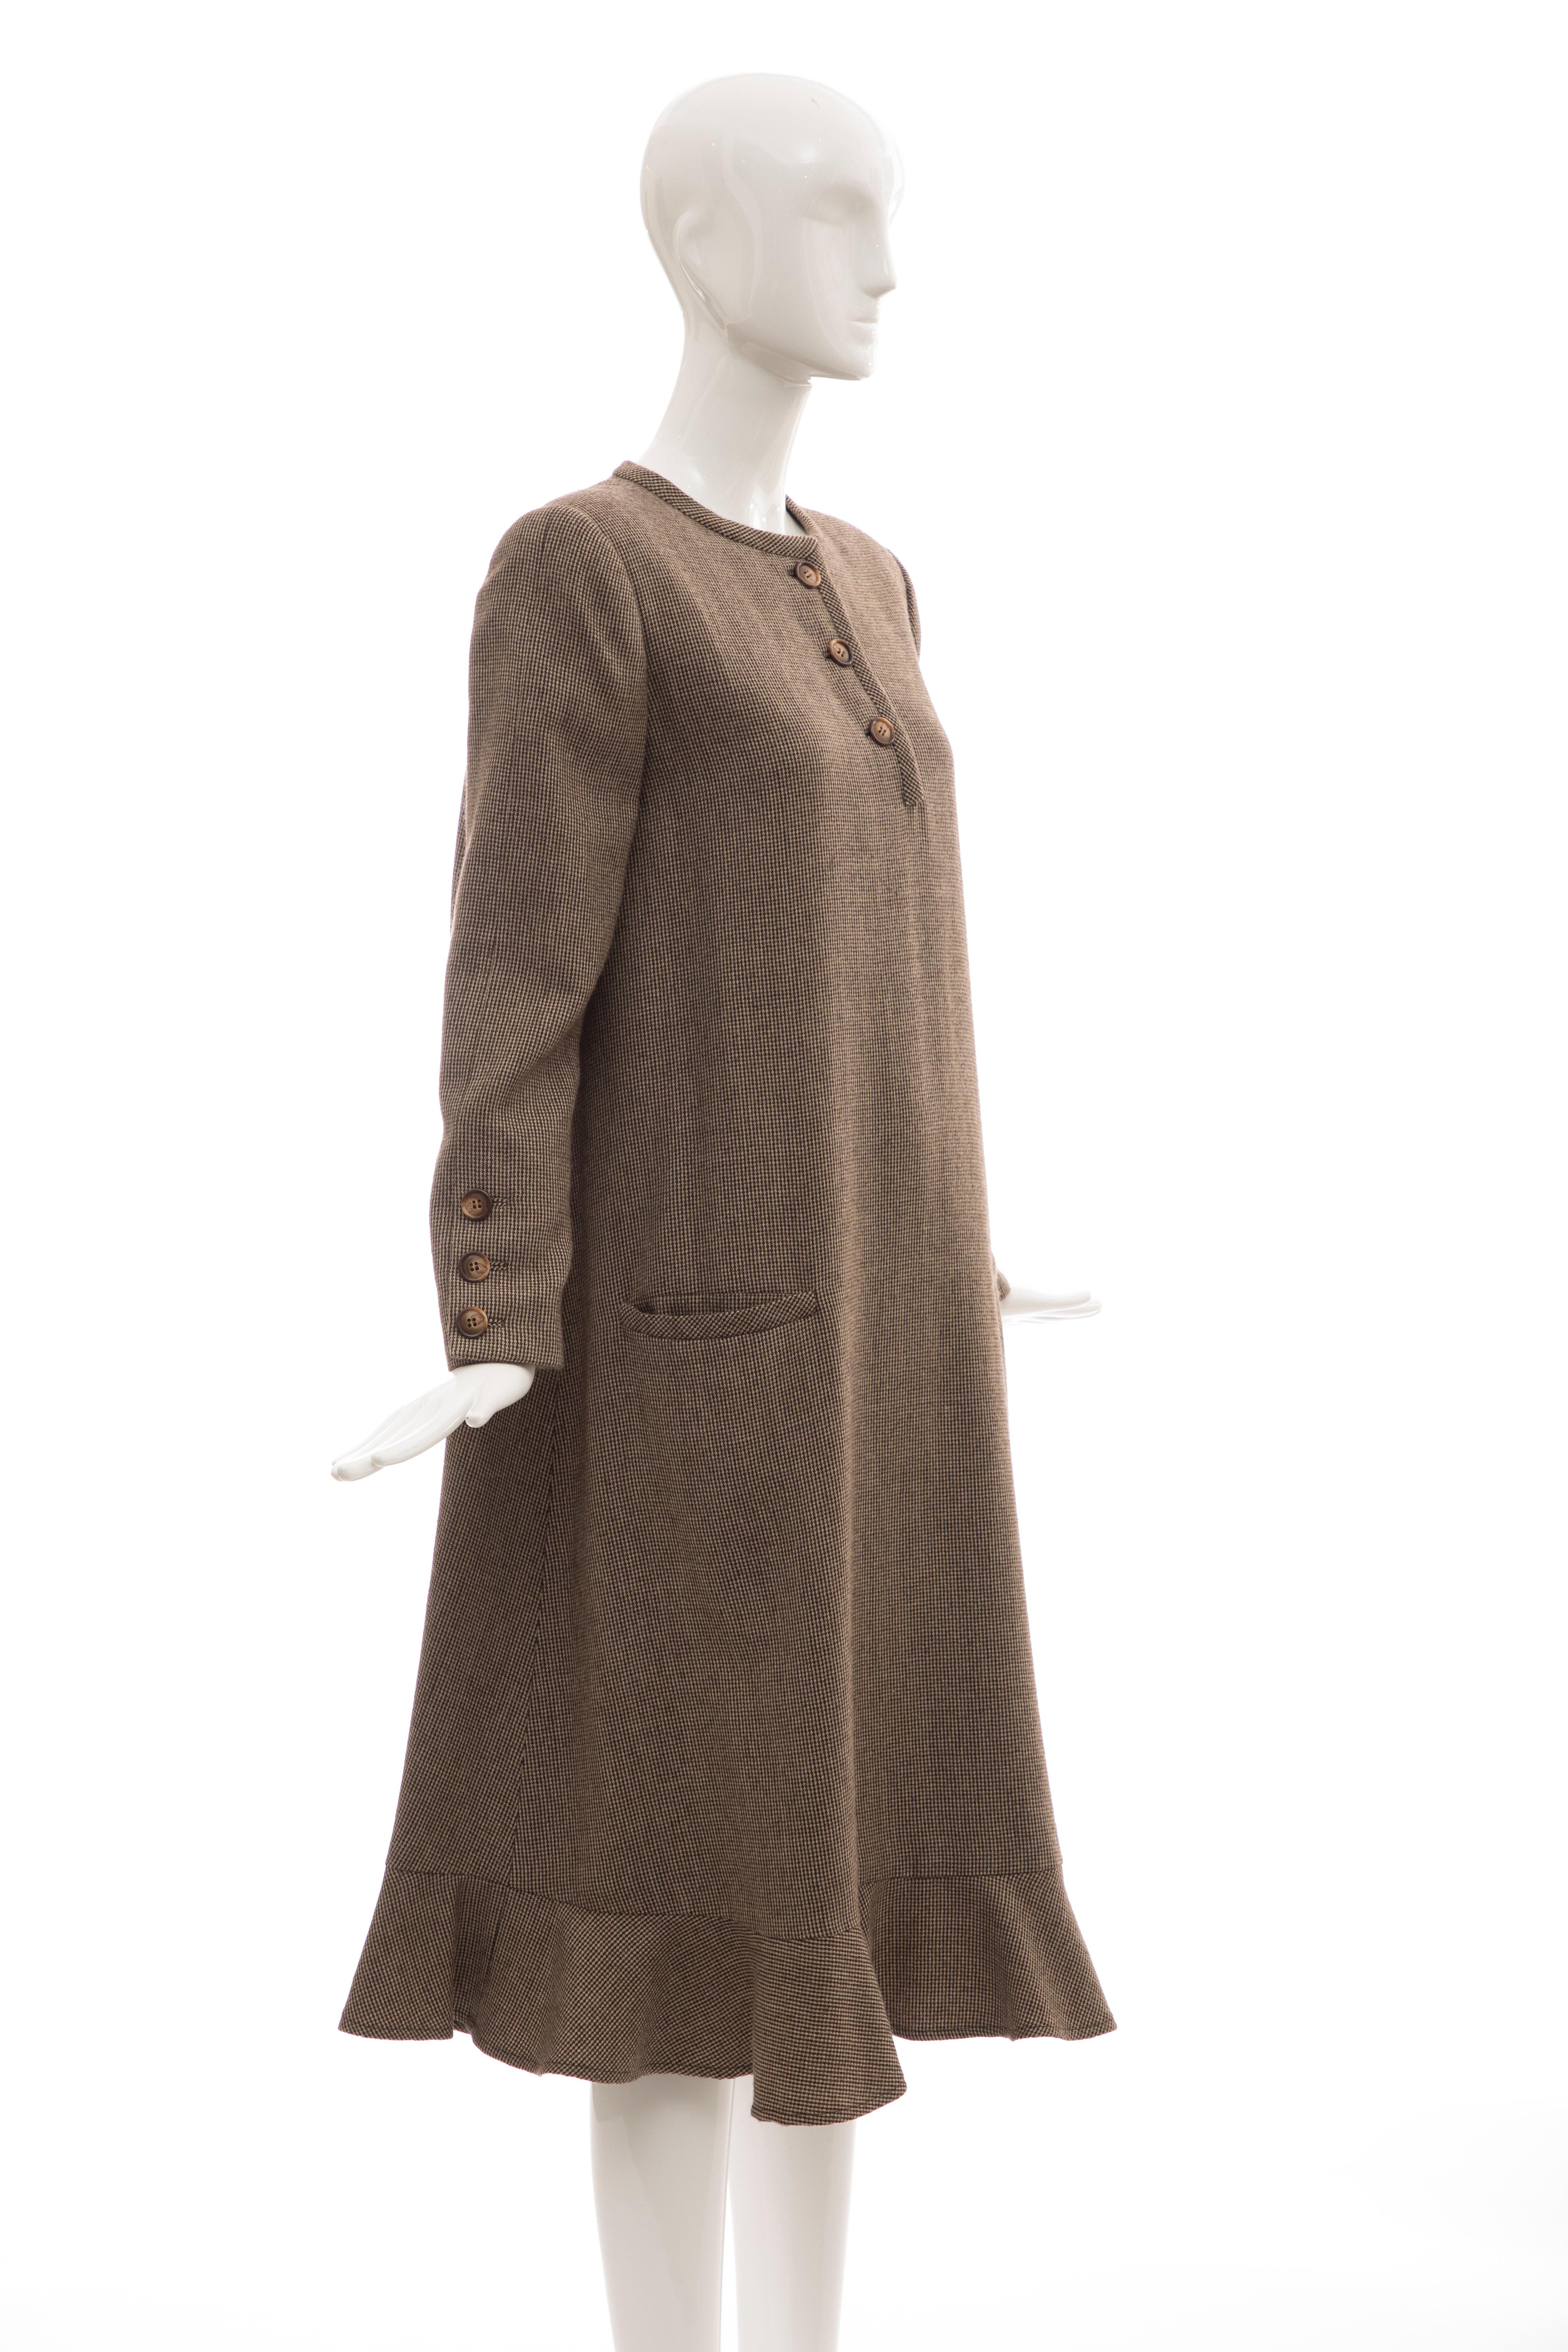 Bill Blass Brown Wool Tweed A Line Button Front Dress, Circa: 1970's For Sale 1